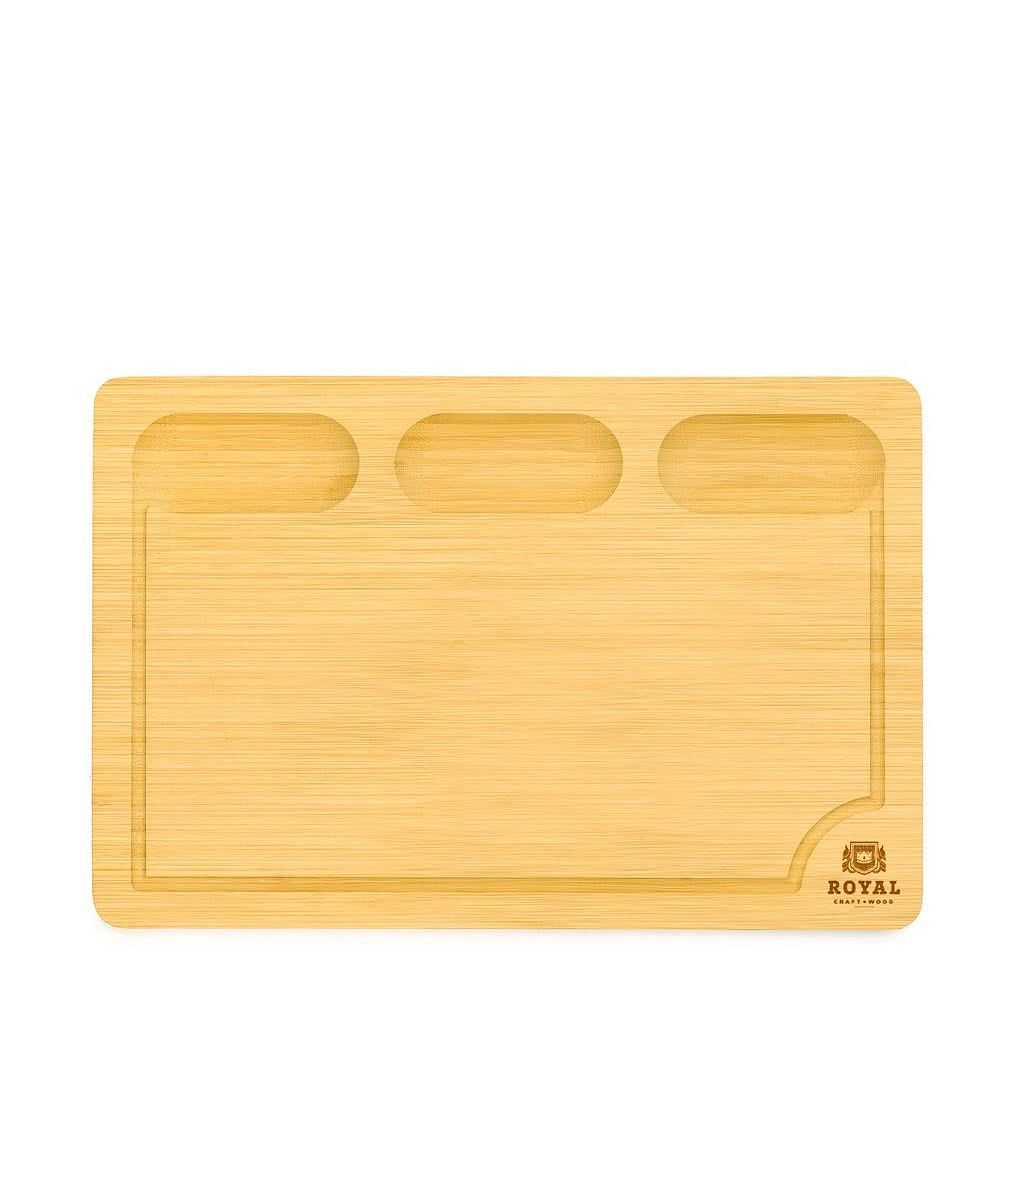 Cutting Board with Compartments 18 x 12"